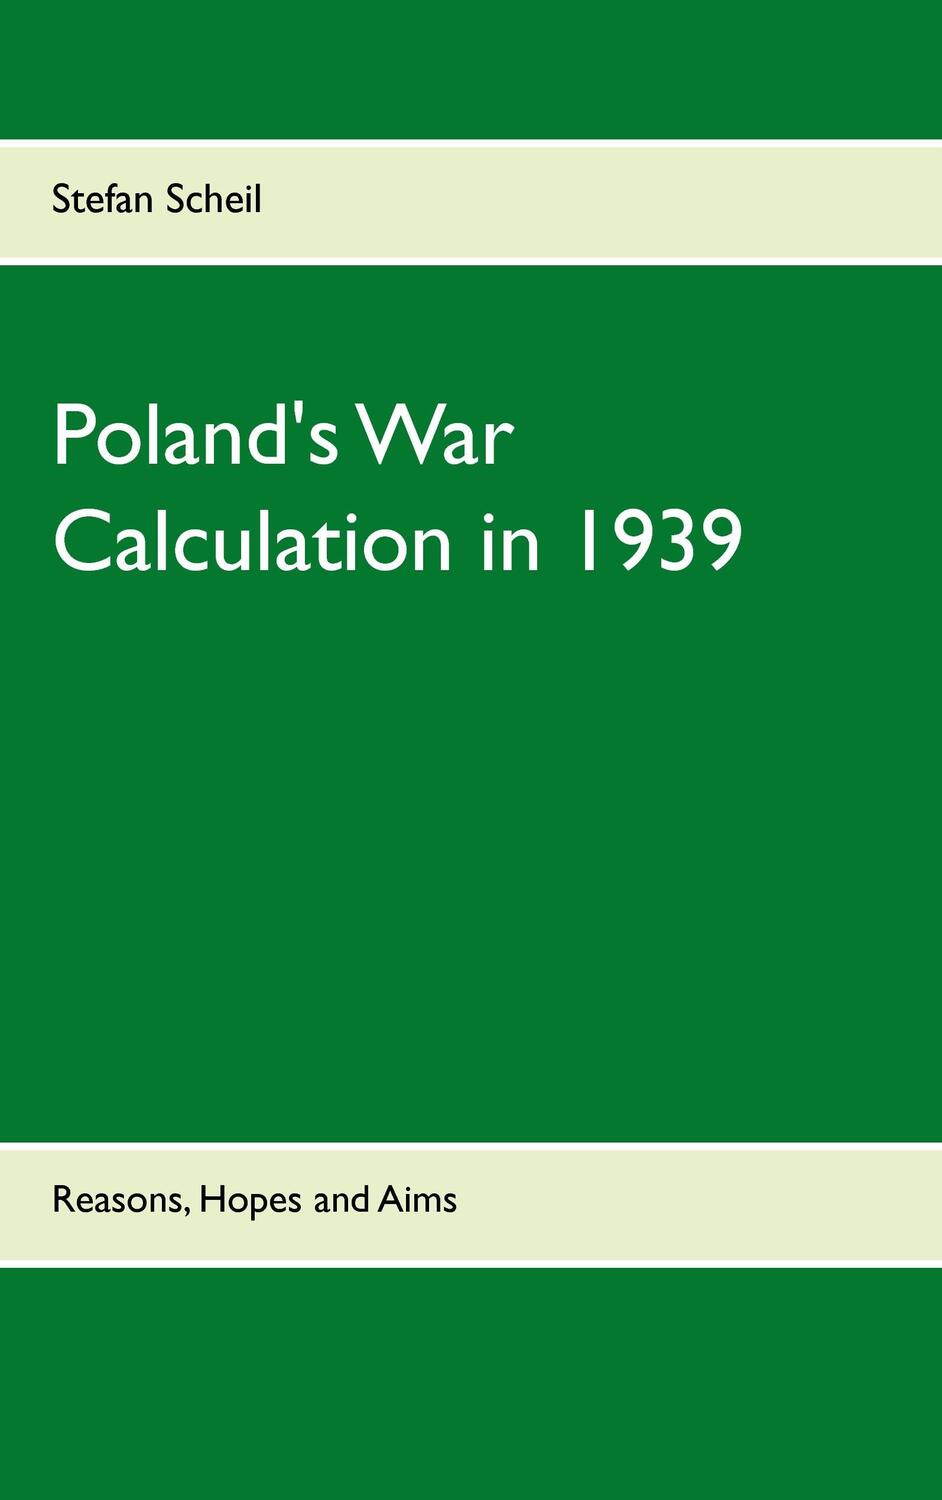 Cover: 9783744822572 | Poland's War Calculation in 1939 | Reasons, Hopes and Aims | Scheil